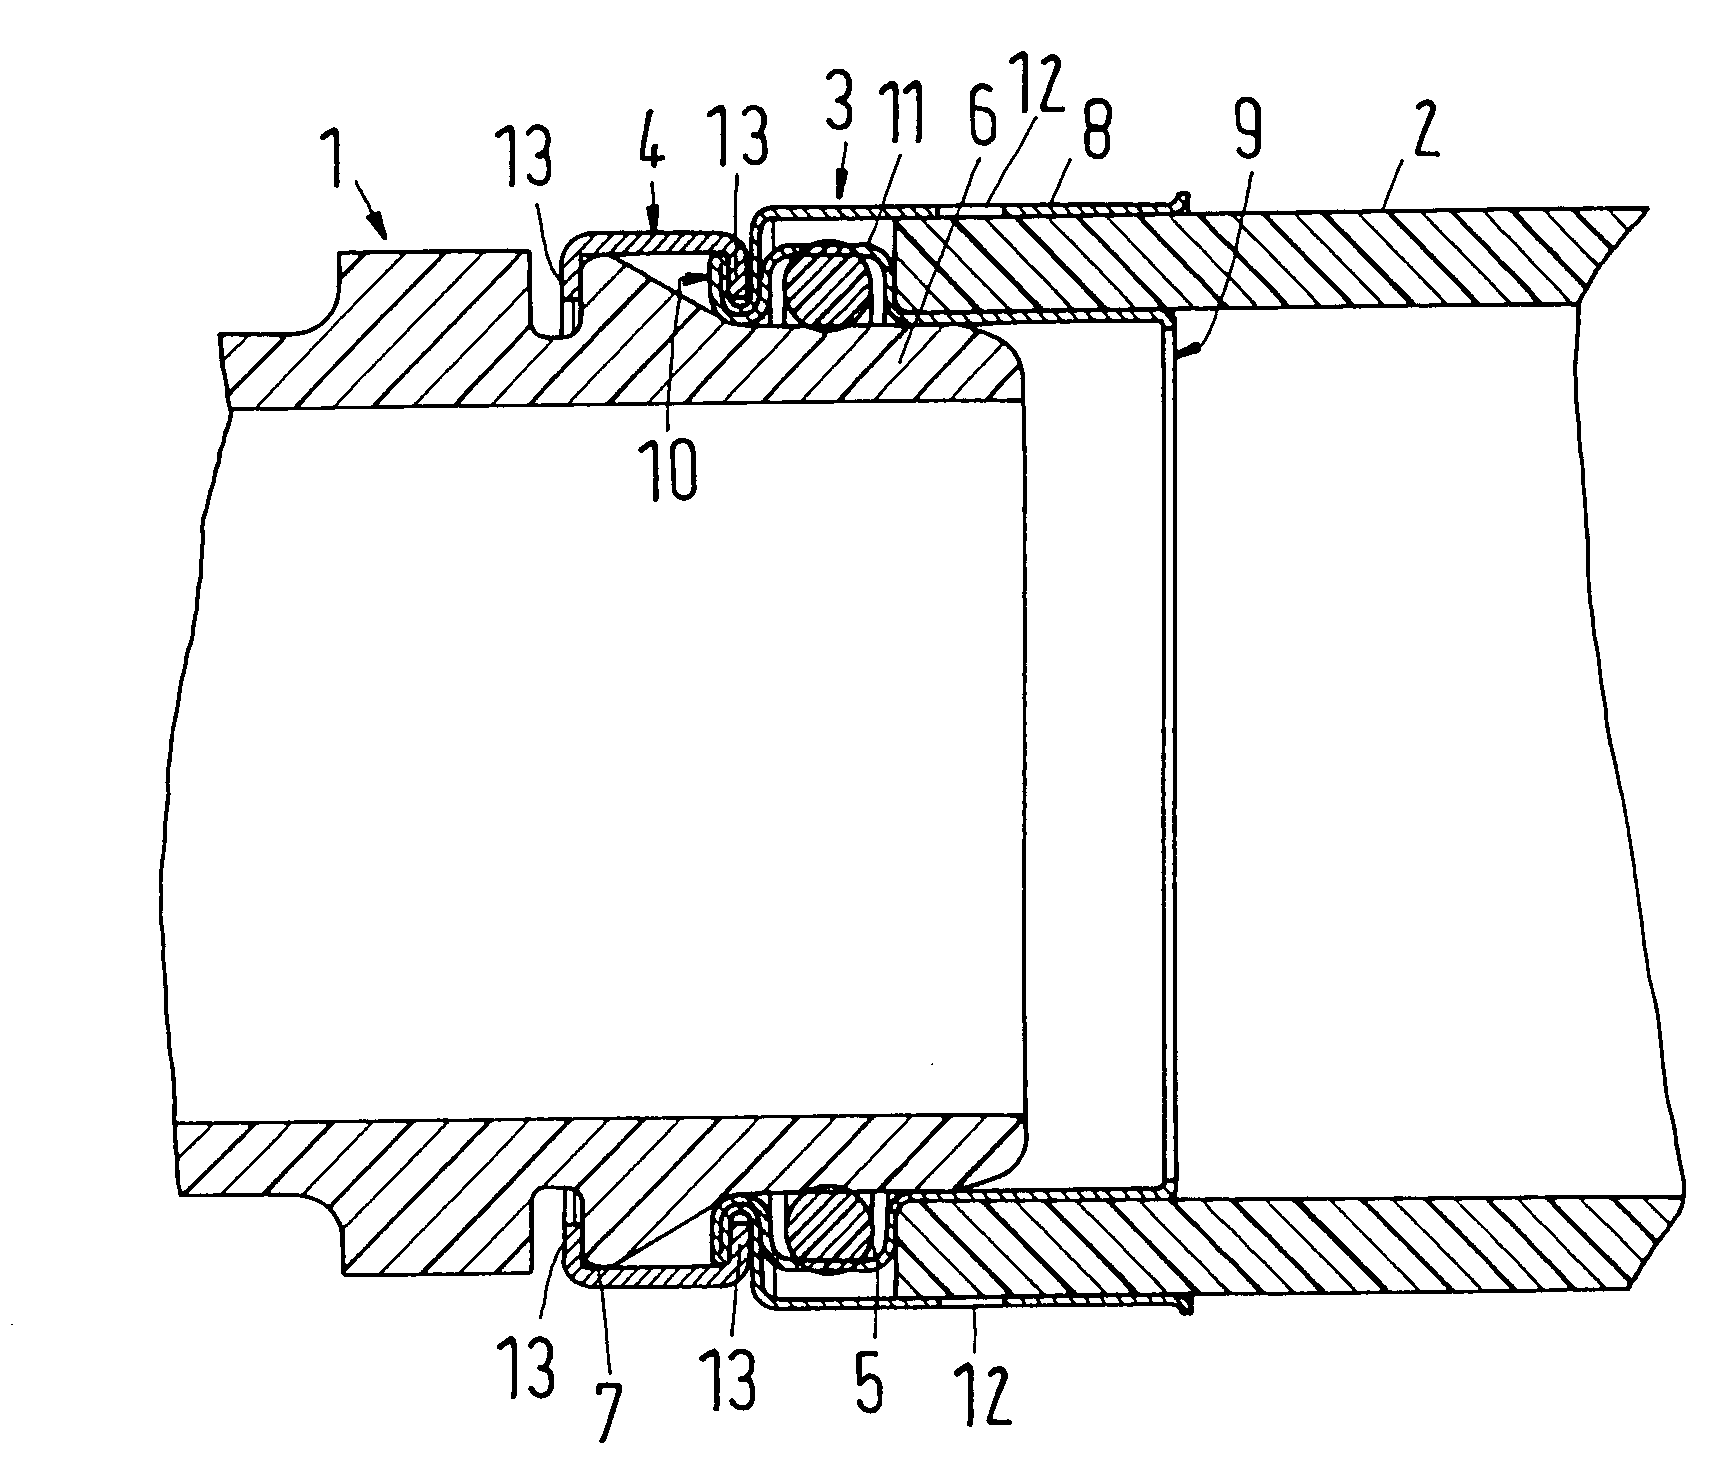 Plug-type connection arrangement for a hose and a pipe